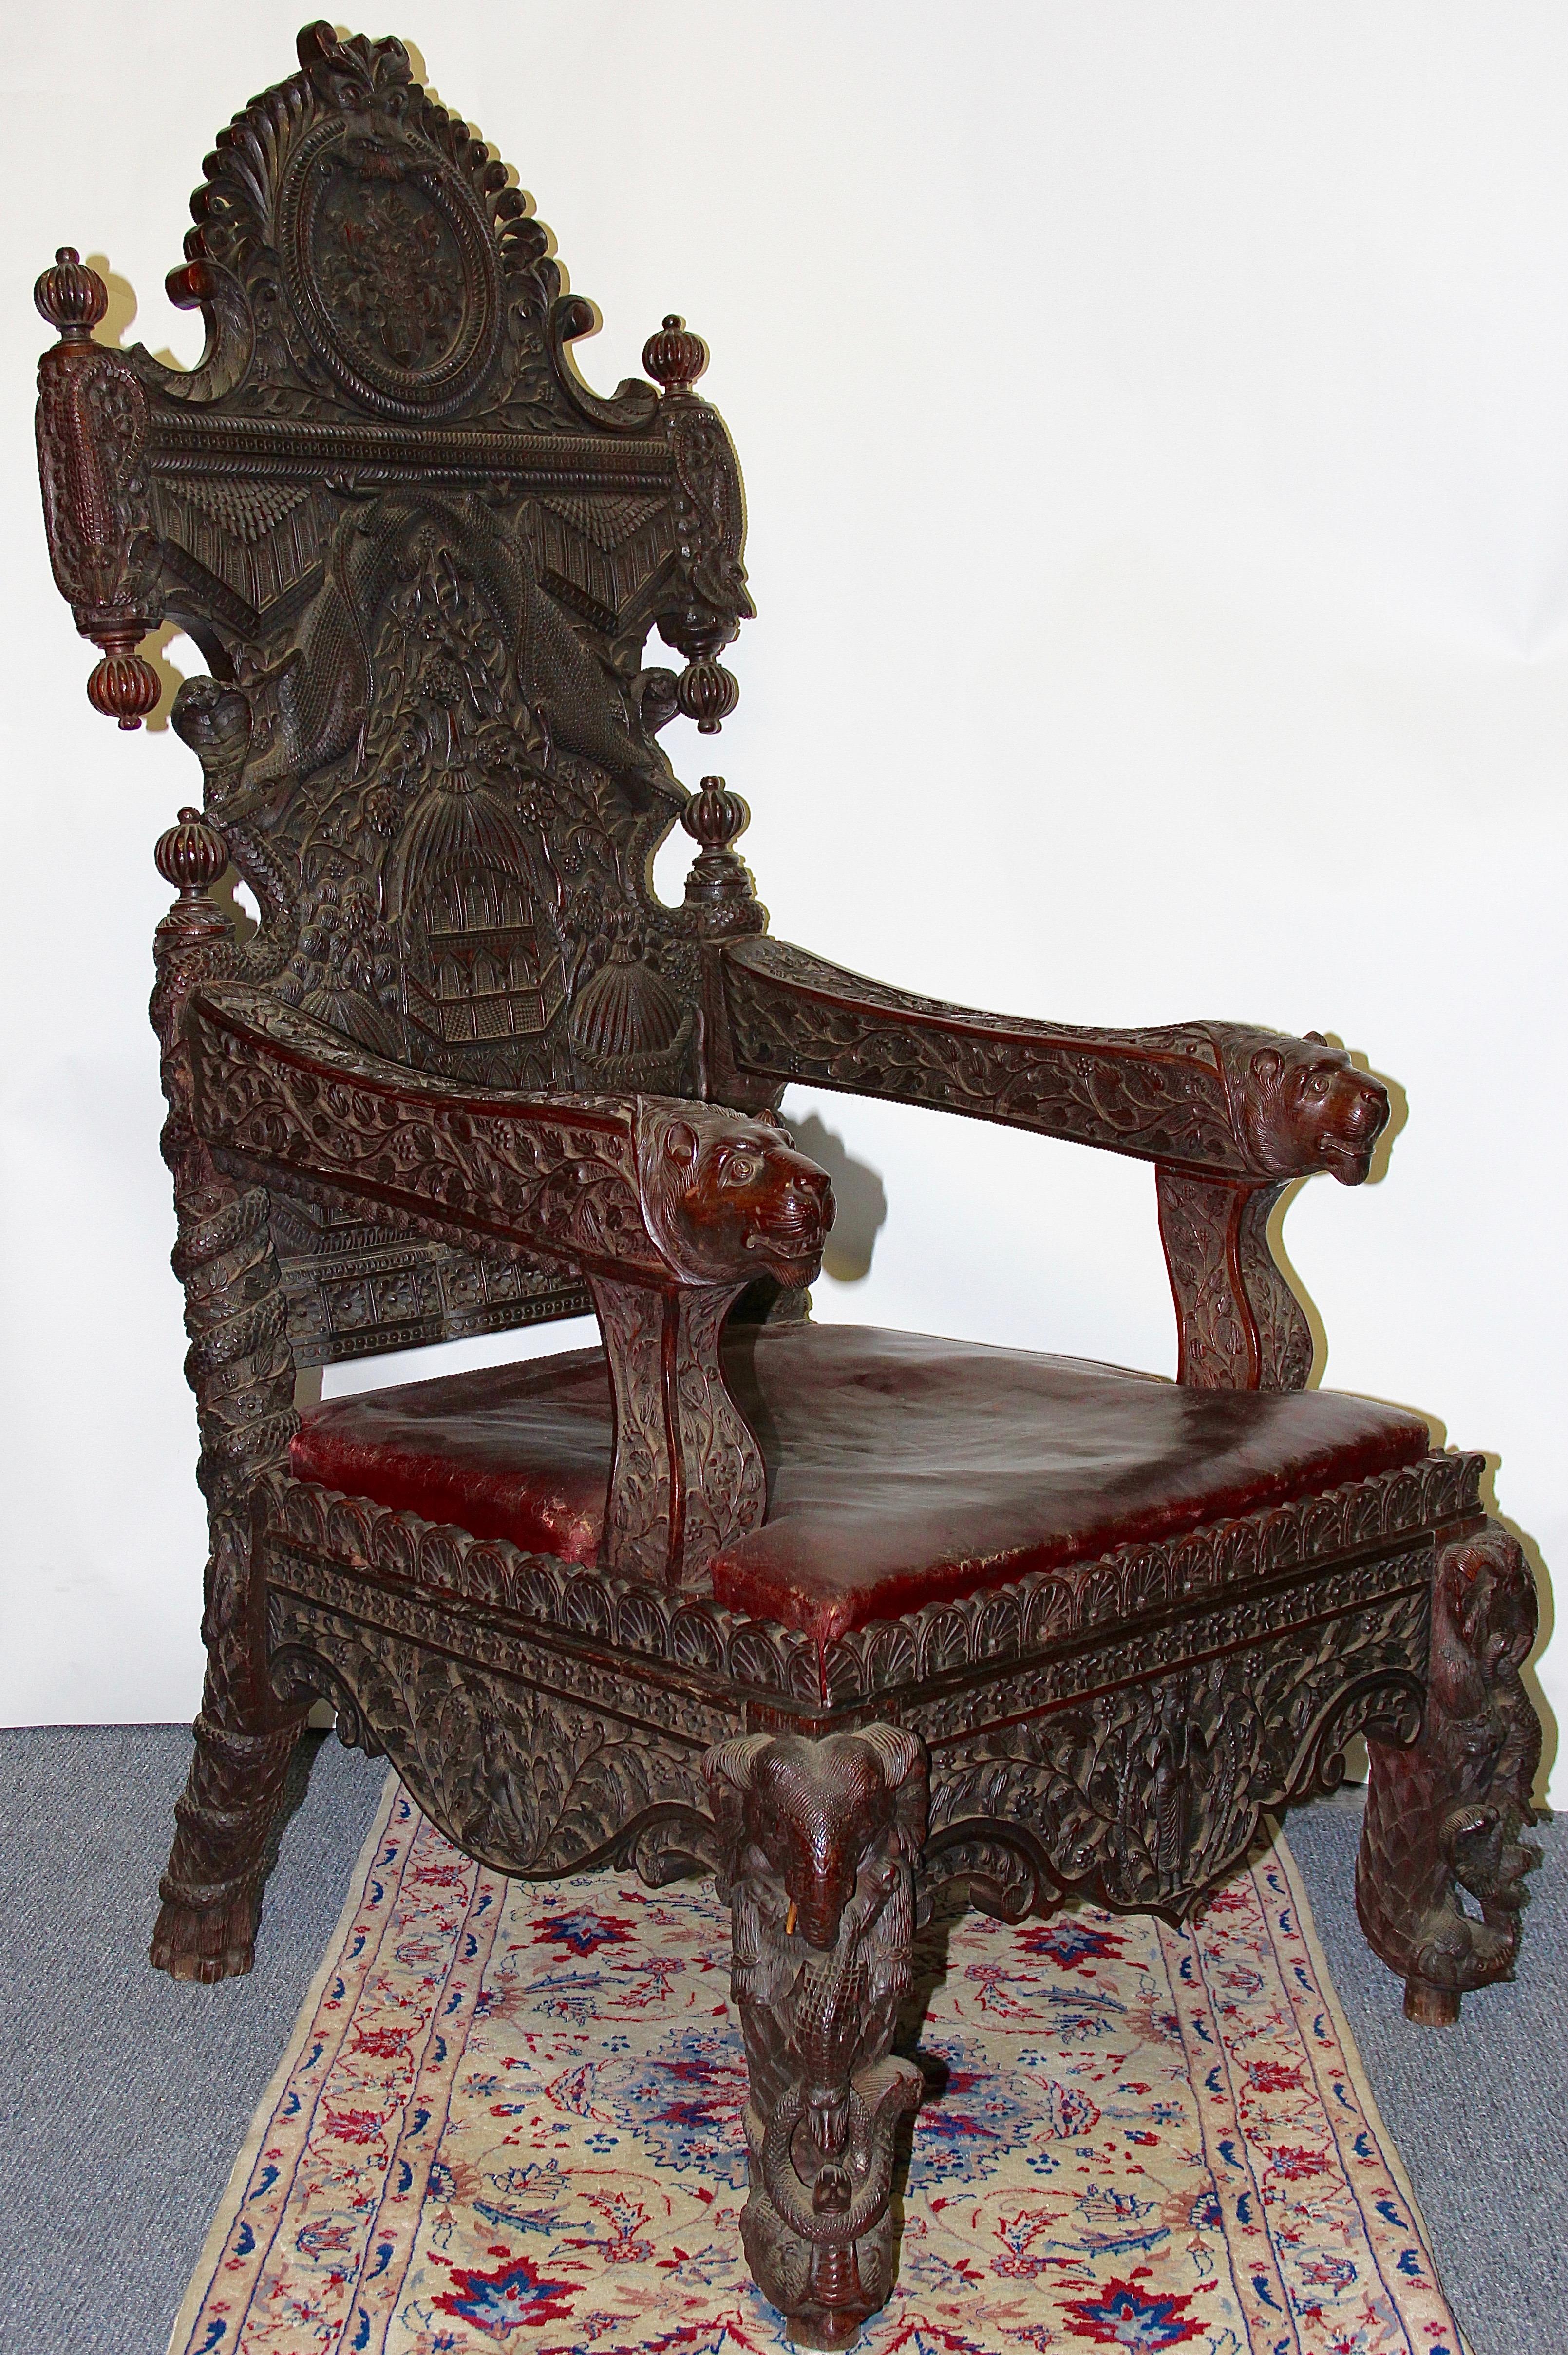 Large and Very Decorative Antique Throne Armchair, 19th Century Solid Wood For Sale 4